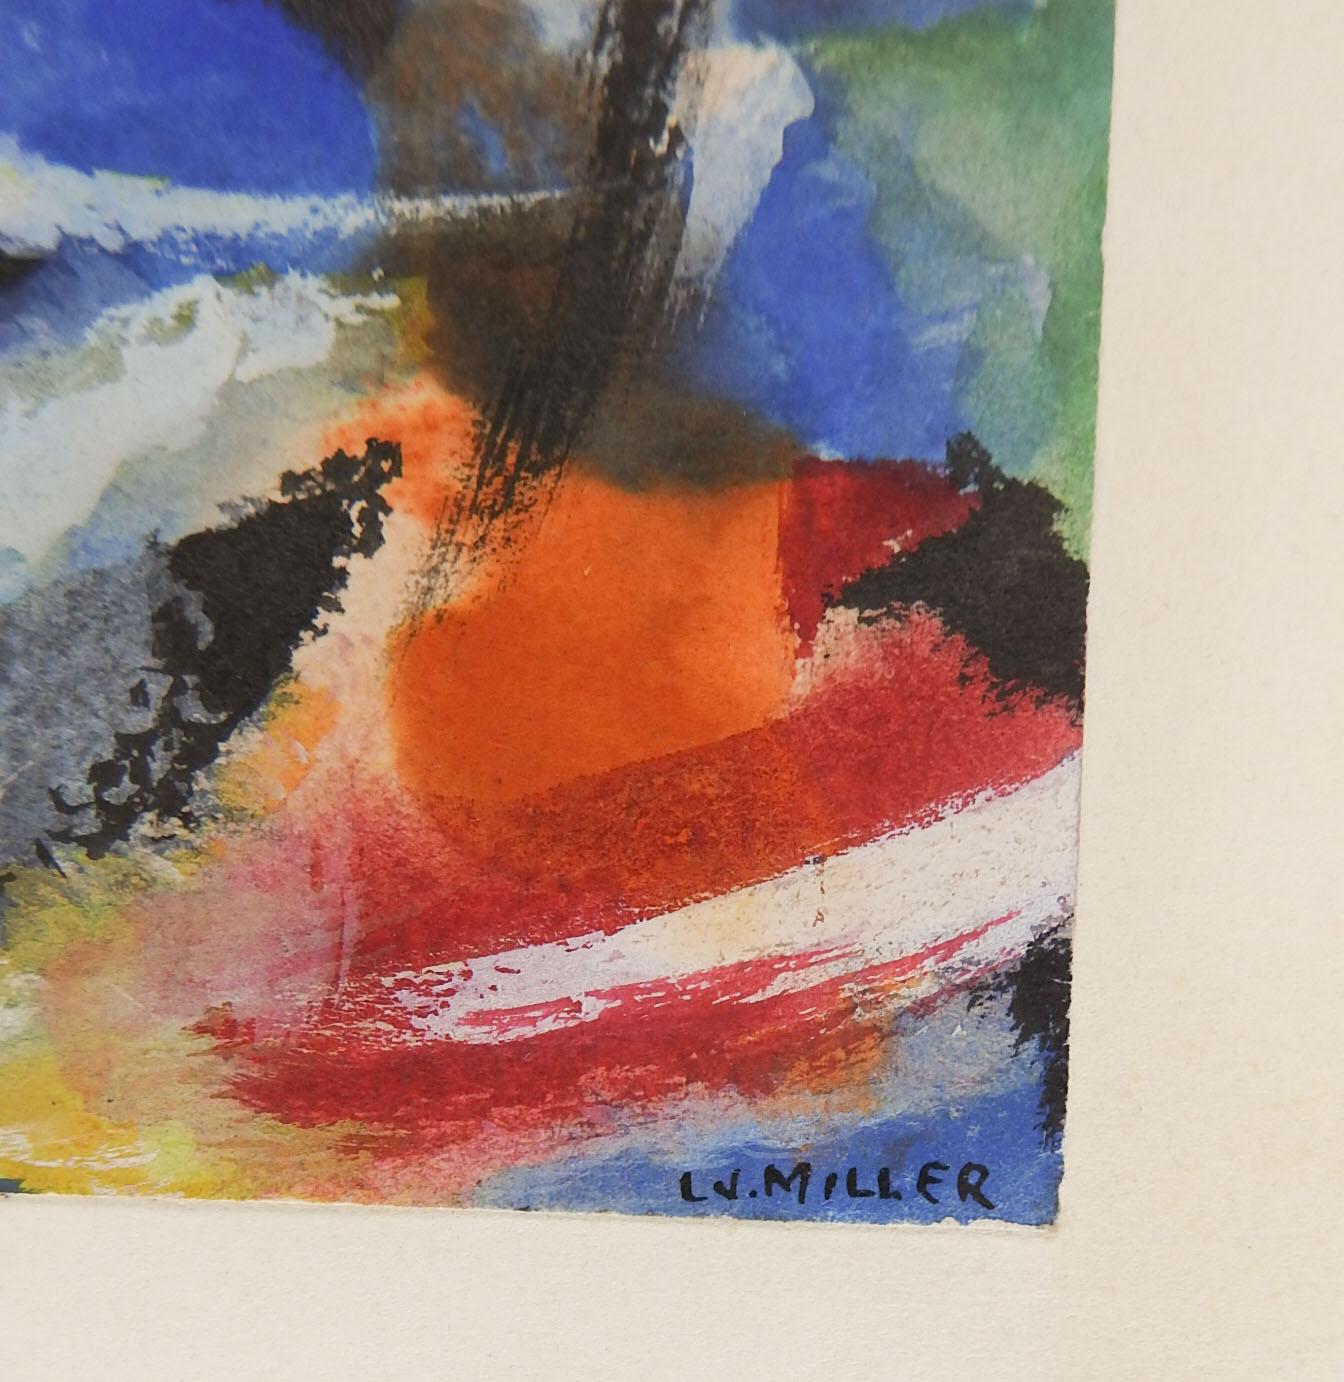 Small vintage 1930's gouache on paper abstract painting by Lewis J. Miller (1912-2007) New York/Florida. Signed and dated upper right corner. Unframed, mounted firmly on cardboard backing, image size 3